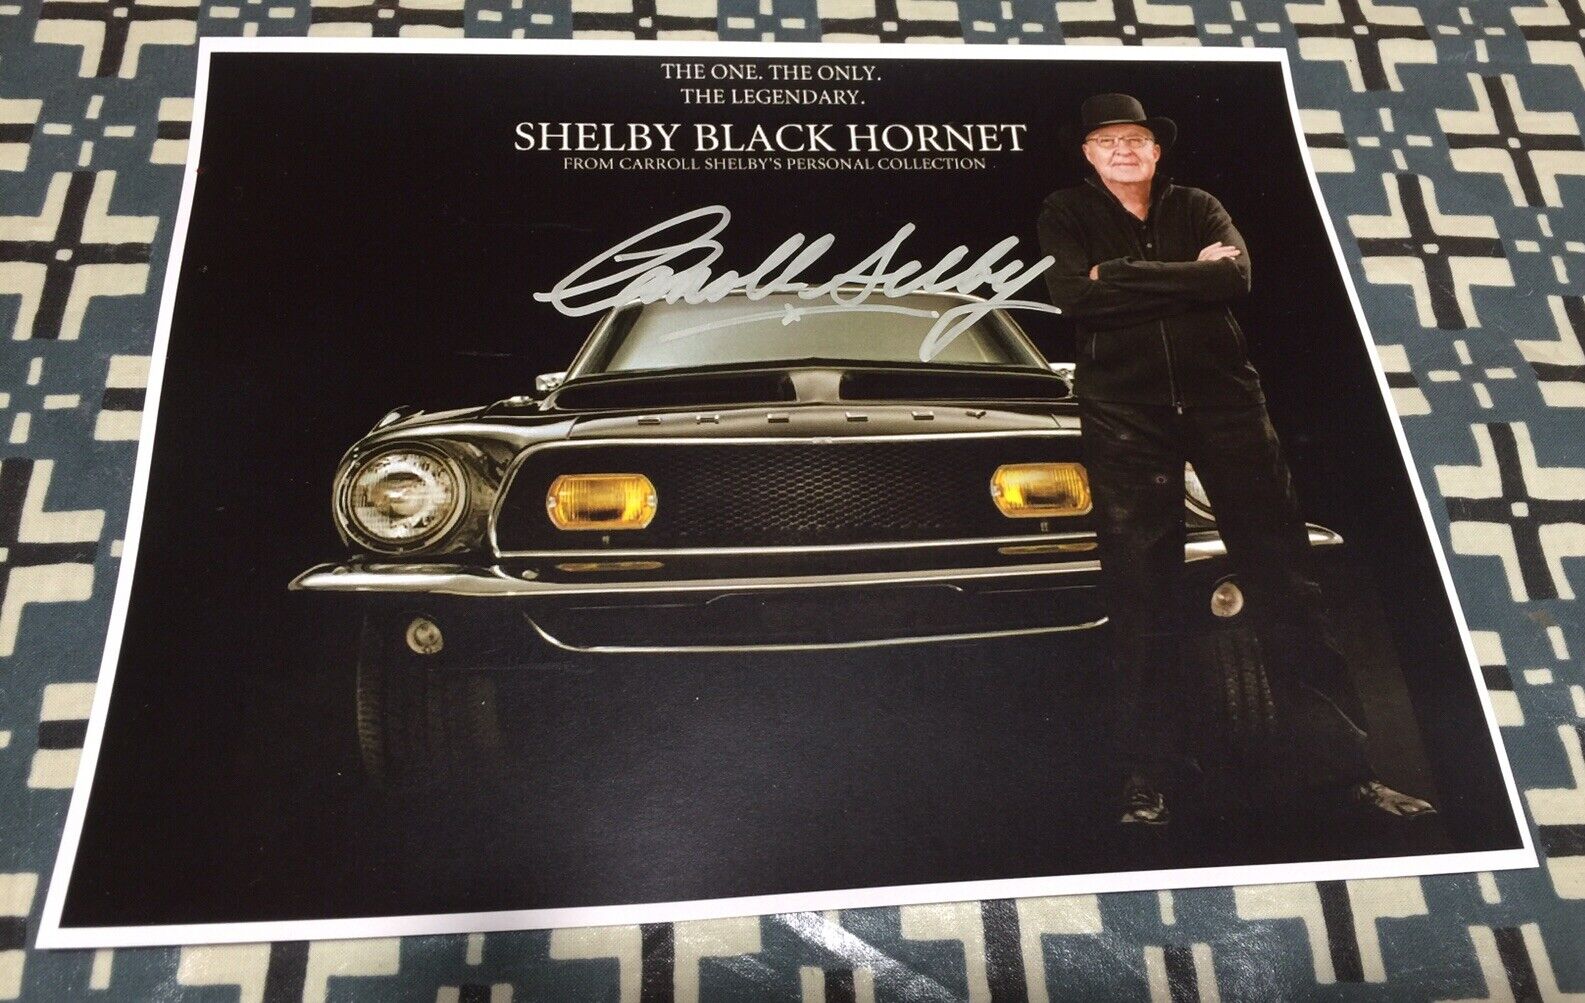 CARROLL SHELBY SIGNED PHOTOGRAPH SHELBY BLACK HORNET THE ONE. THE ONLY. LEGEND